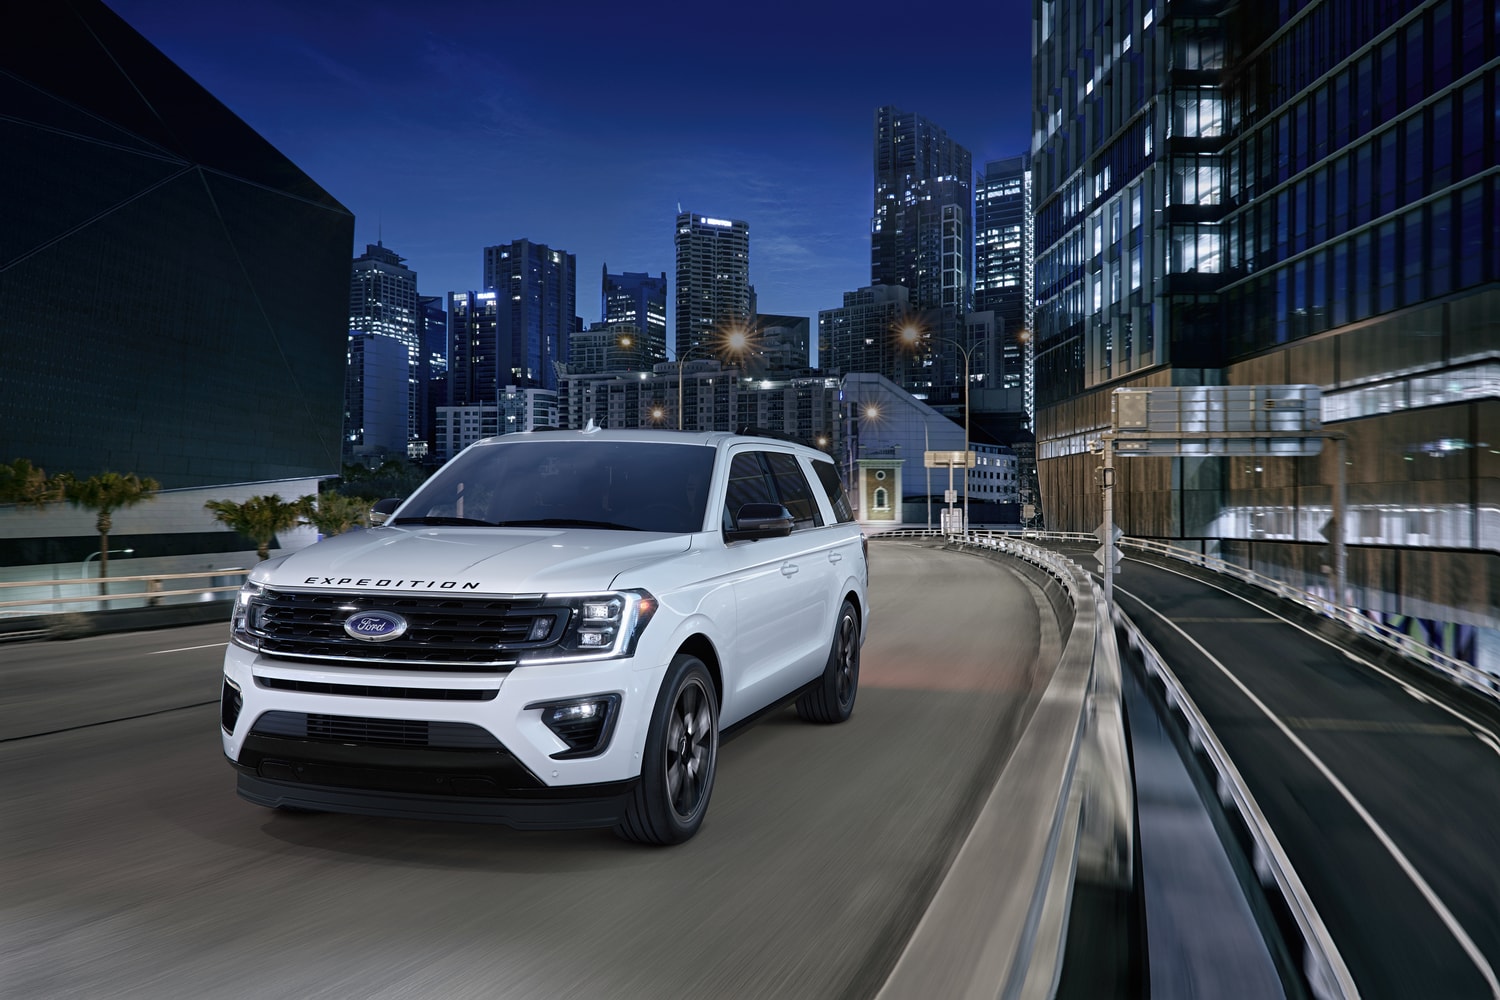 white Ford Expedition SUV driving through a city at night